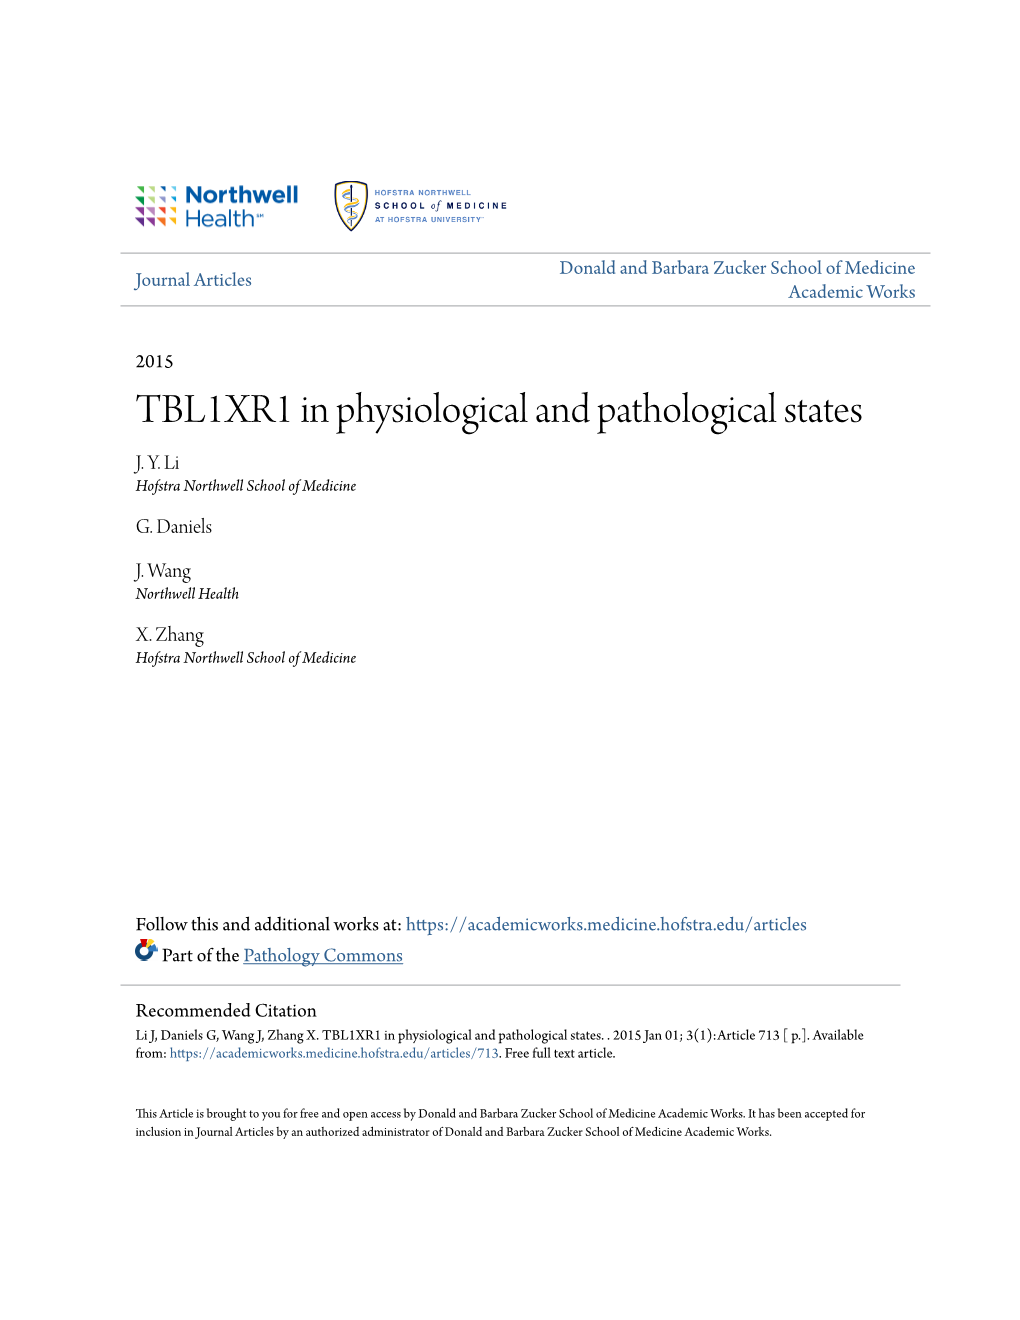 TBL1XR1 in Physiological and Pathological States J